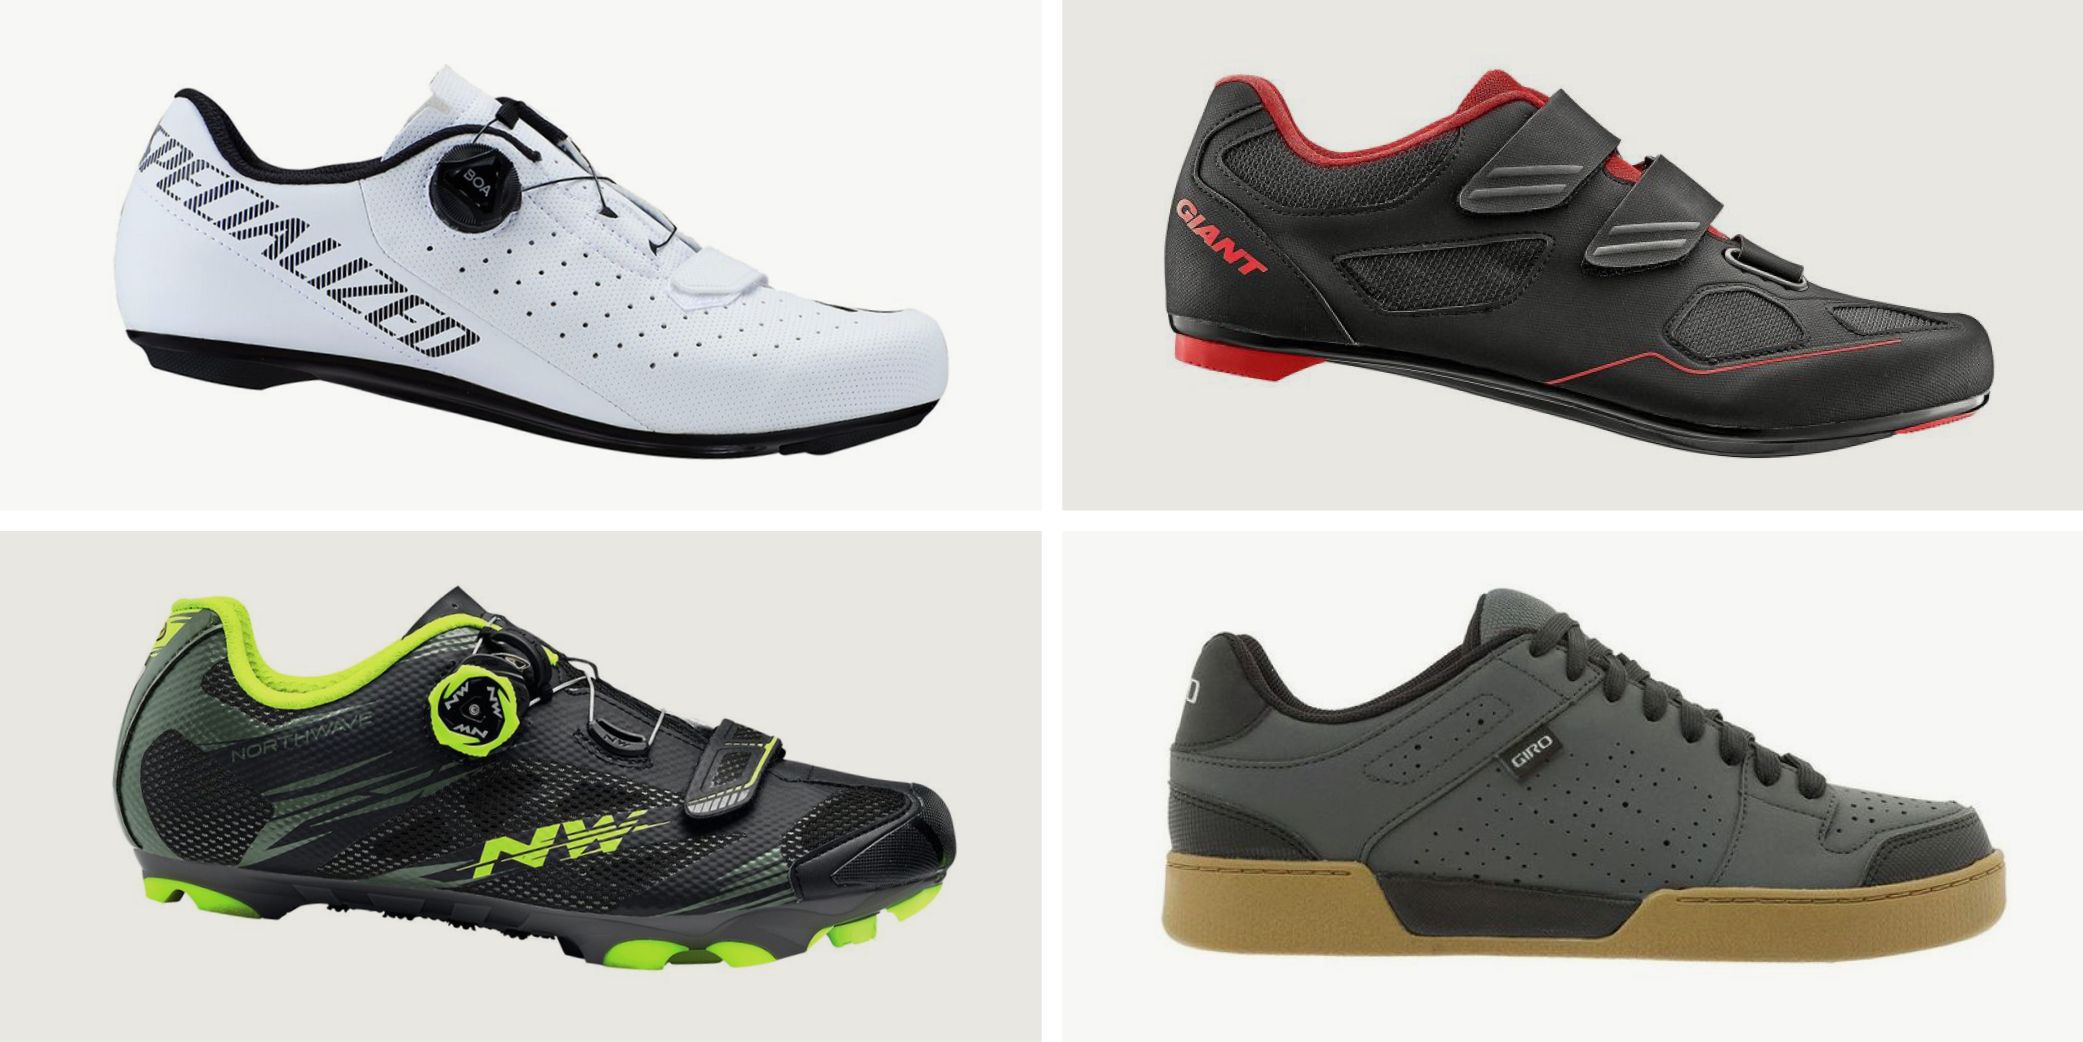 Giant Surge Road Shoe Reviewed | Bicycling